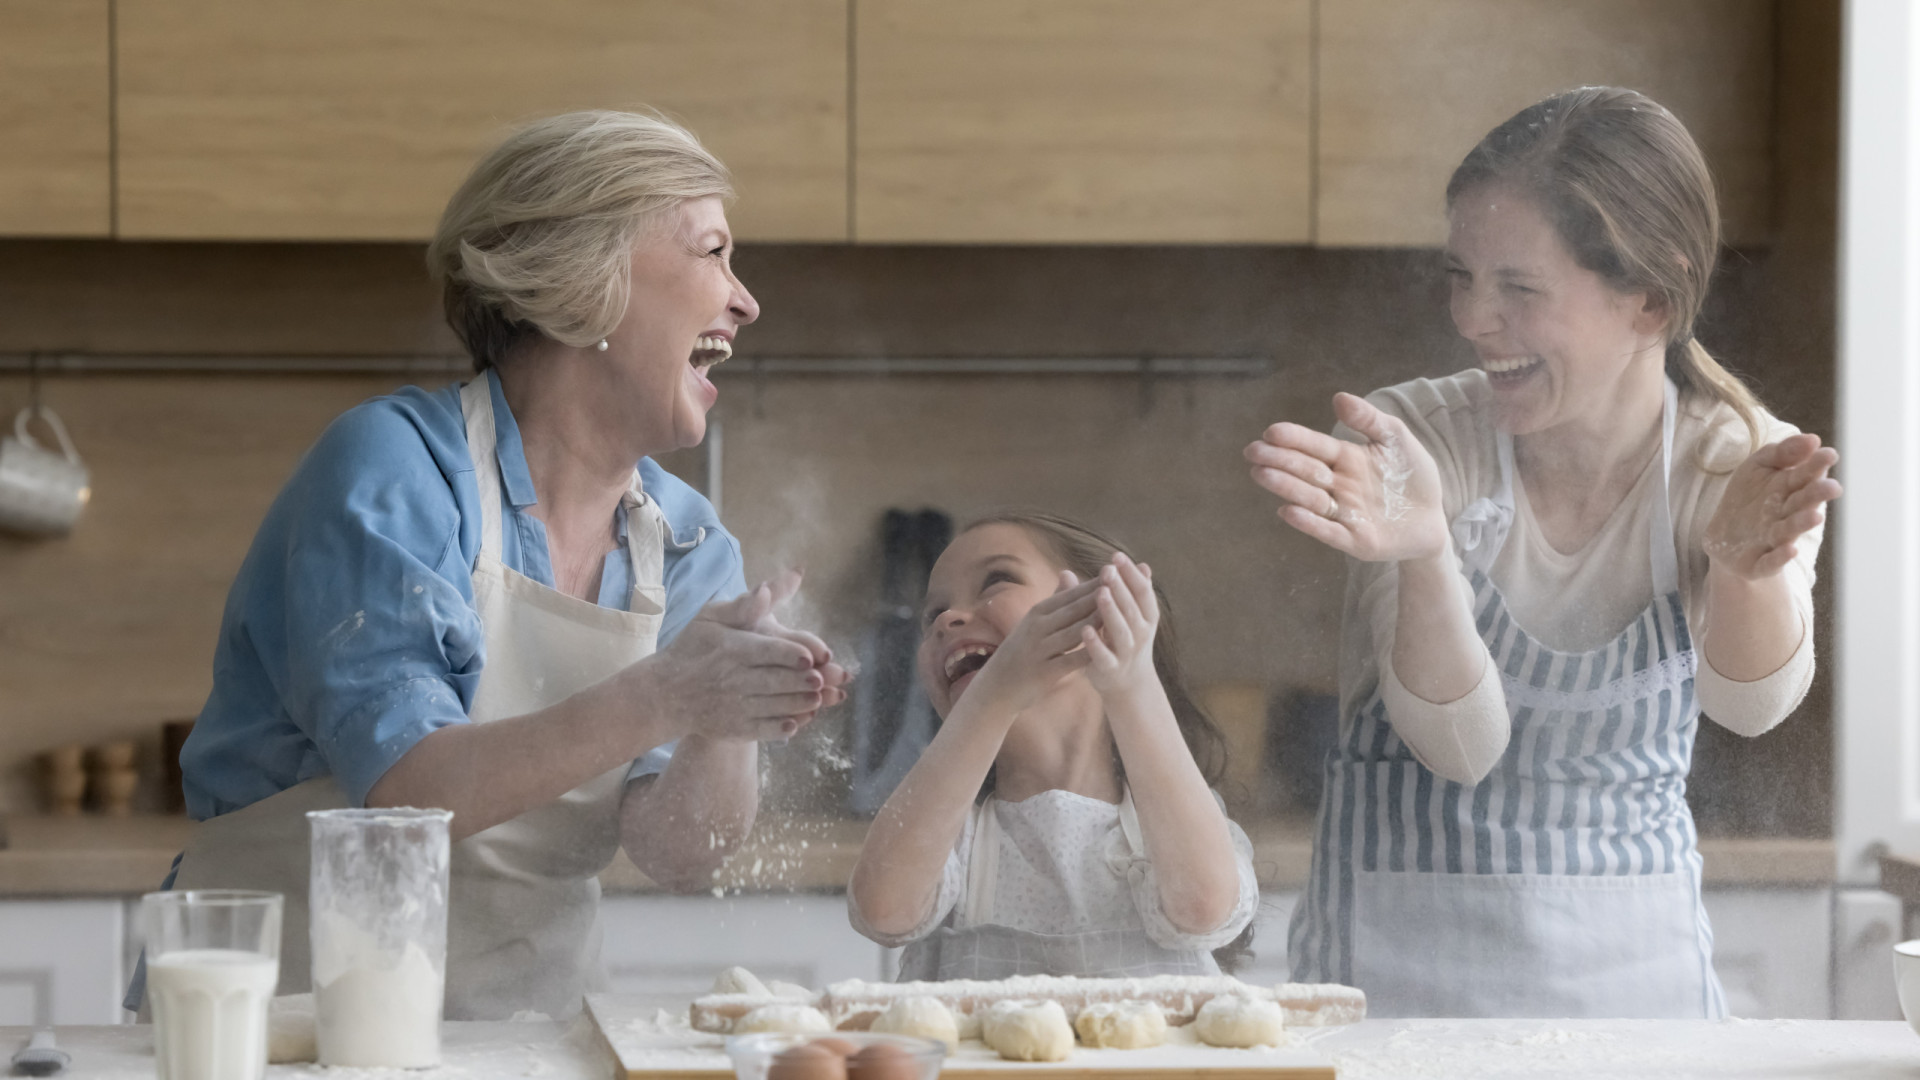 <p>Set out the pots and pans and search for a family recipe (or find one online) with your mom. Spend some time together baking or cooking and laughing with one another.</p><p><a href="https://www.msn.com/en-us/community/channel/vid-7xx8mnucu55yw63we9va2gwr7uihbxwc68fxqp25x6tg4ftibpra?cvid=94631541bc0f4f89bfd59158d696ad7e">Follow us and access great exclusive content every day</a></p>